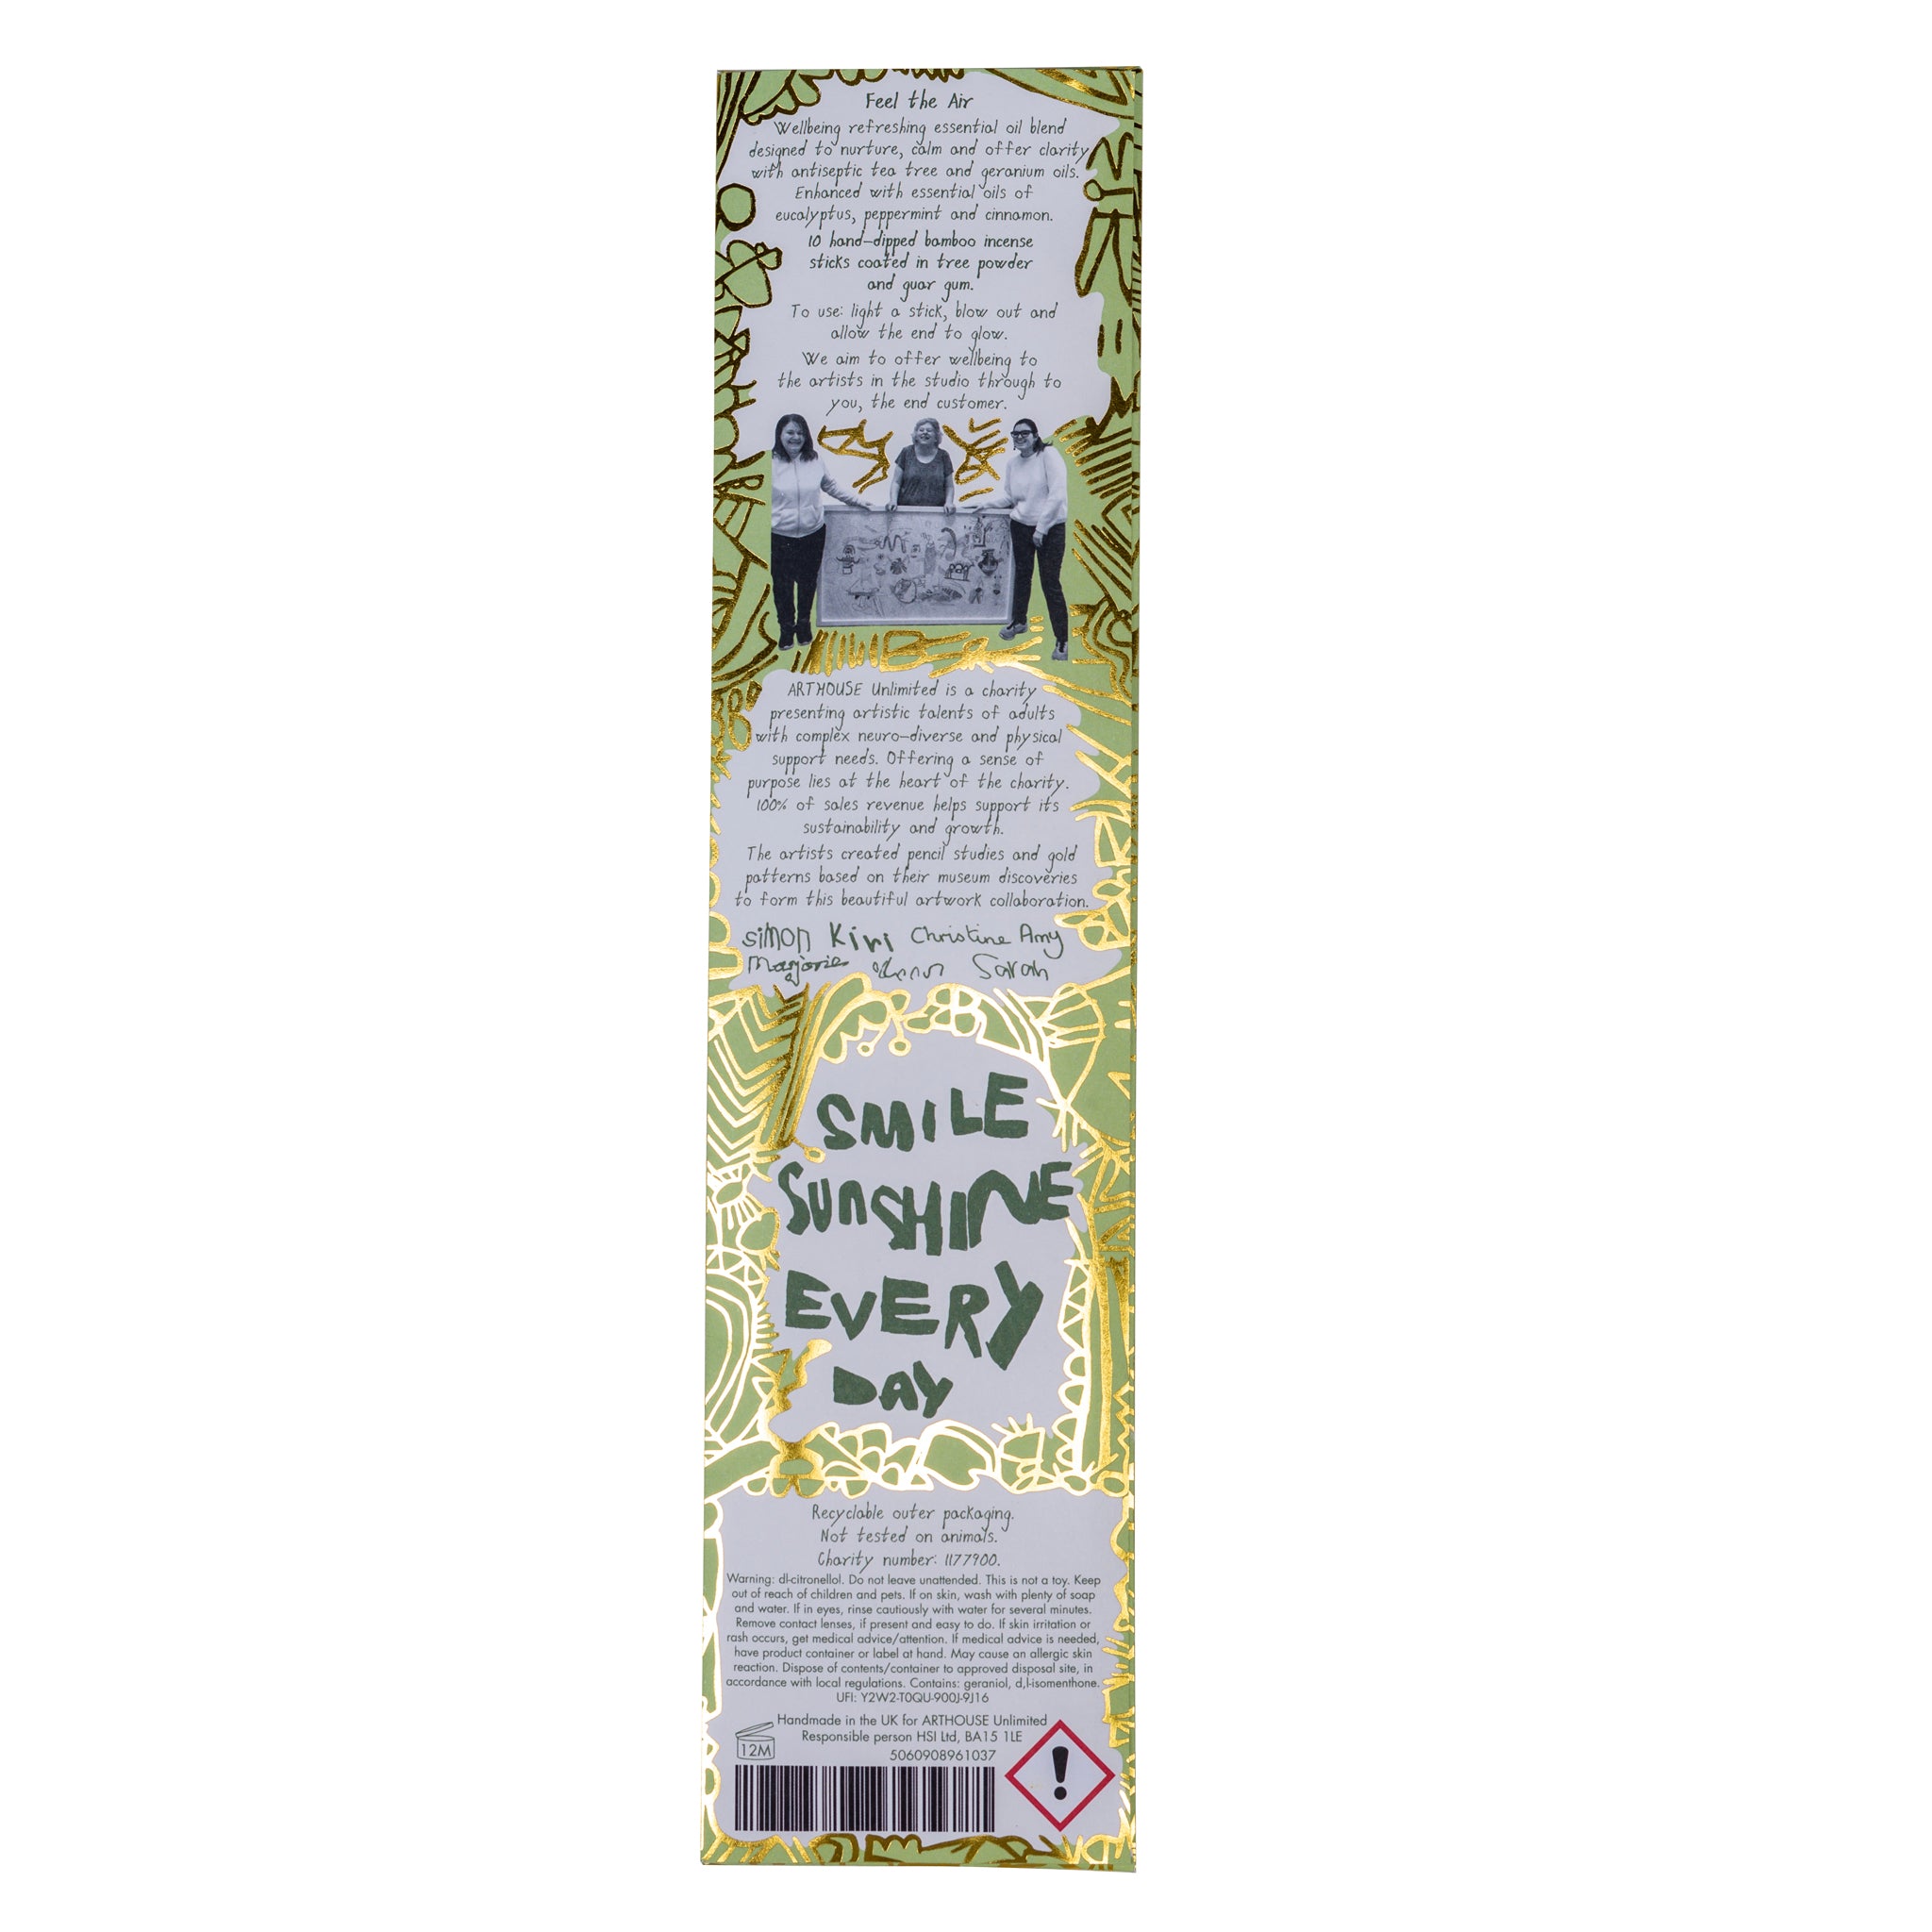 Back of the packet of Feel The Air, Well Being Incense Sticks, Refreshing Blend